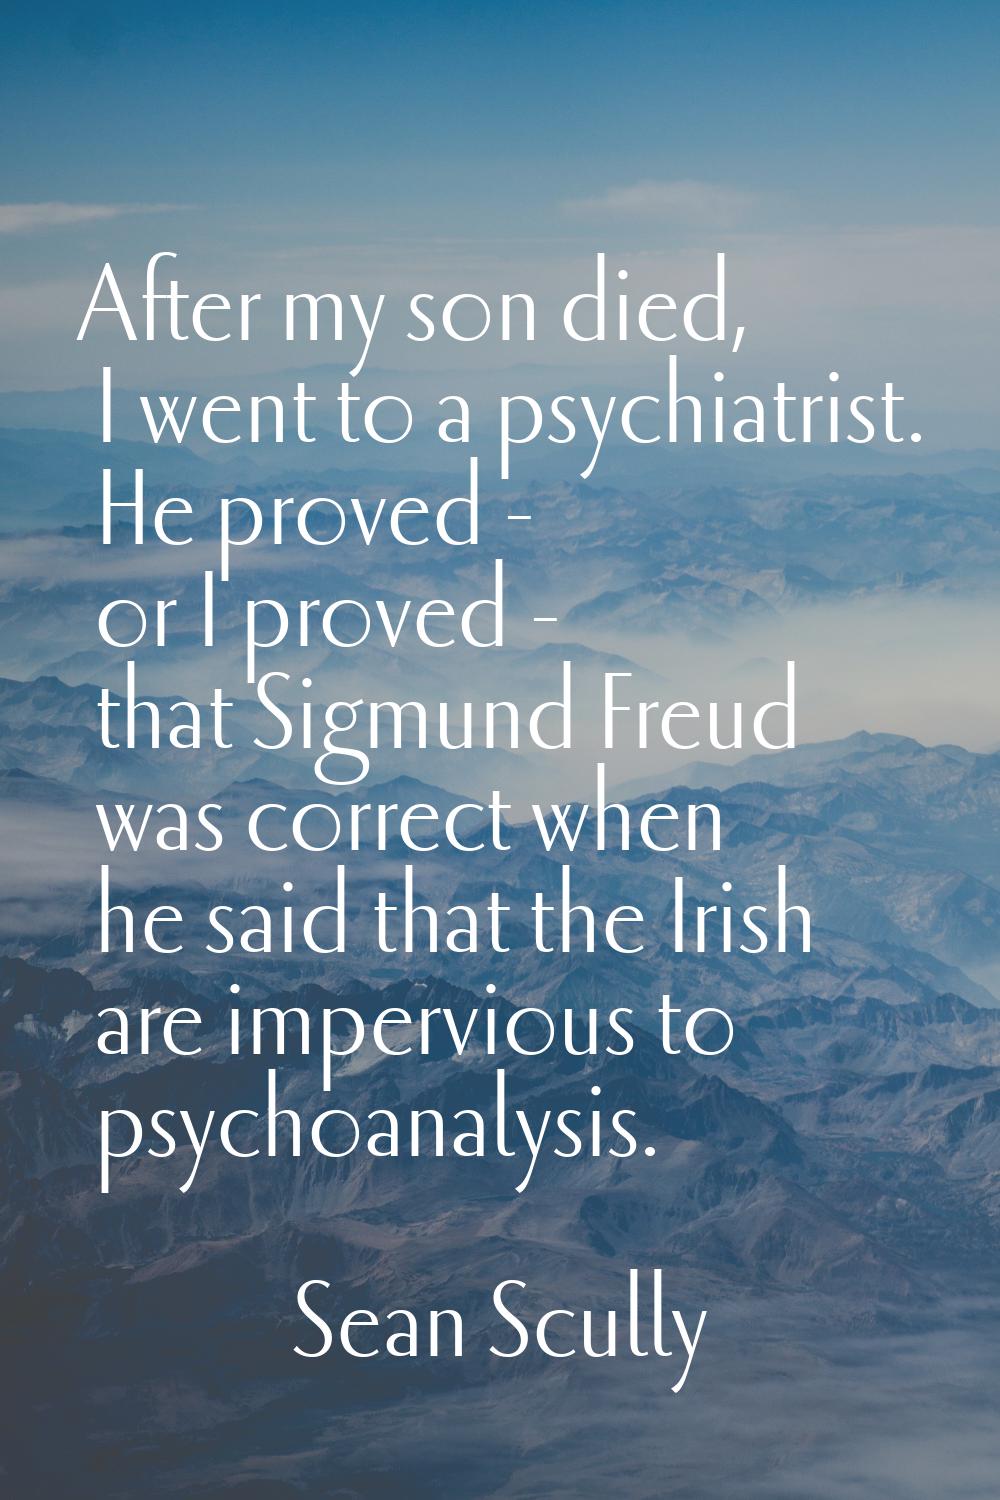 After my son died, I went to a psychiatrist. He proved - or I proved - that Sigmund Freud was corre